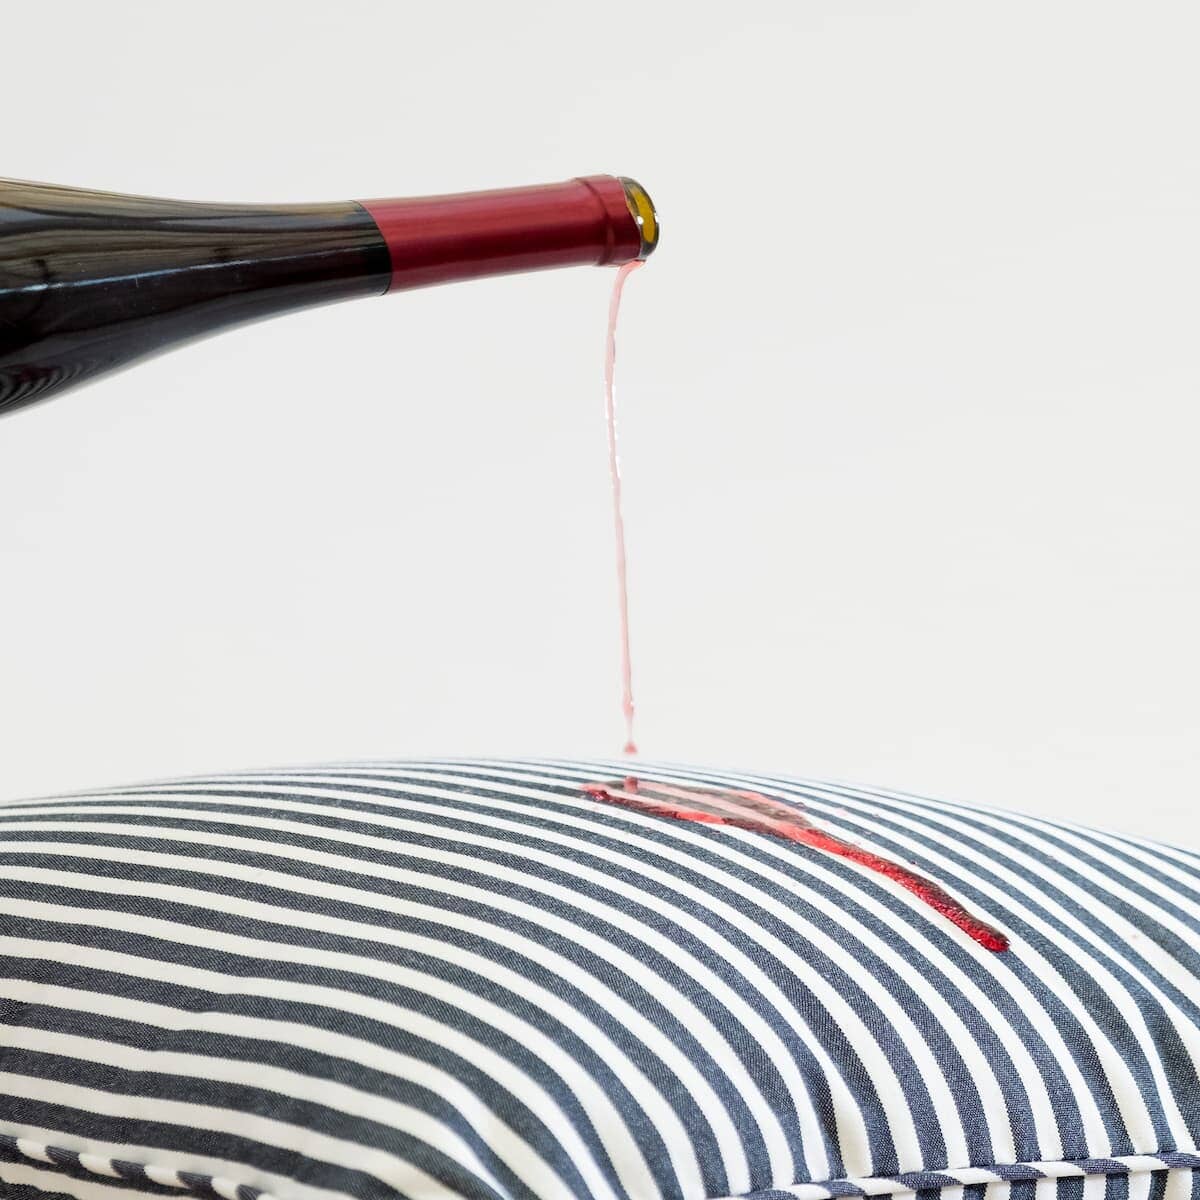 Studio image of red wine being poured on the pillow